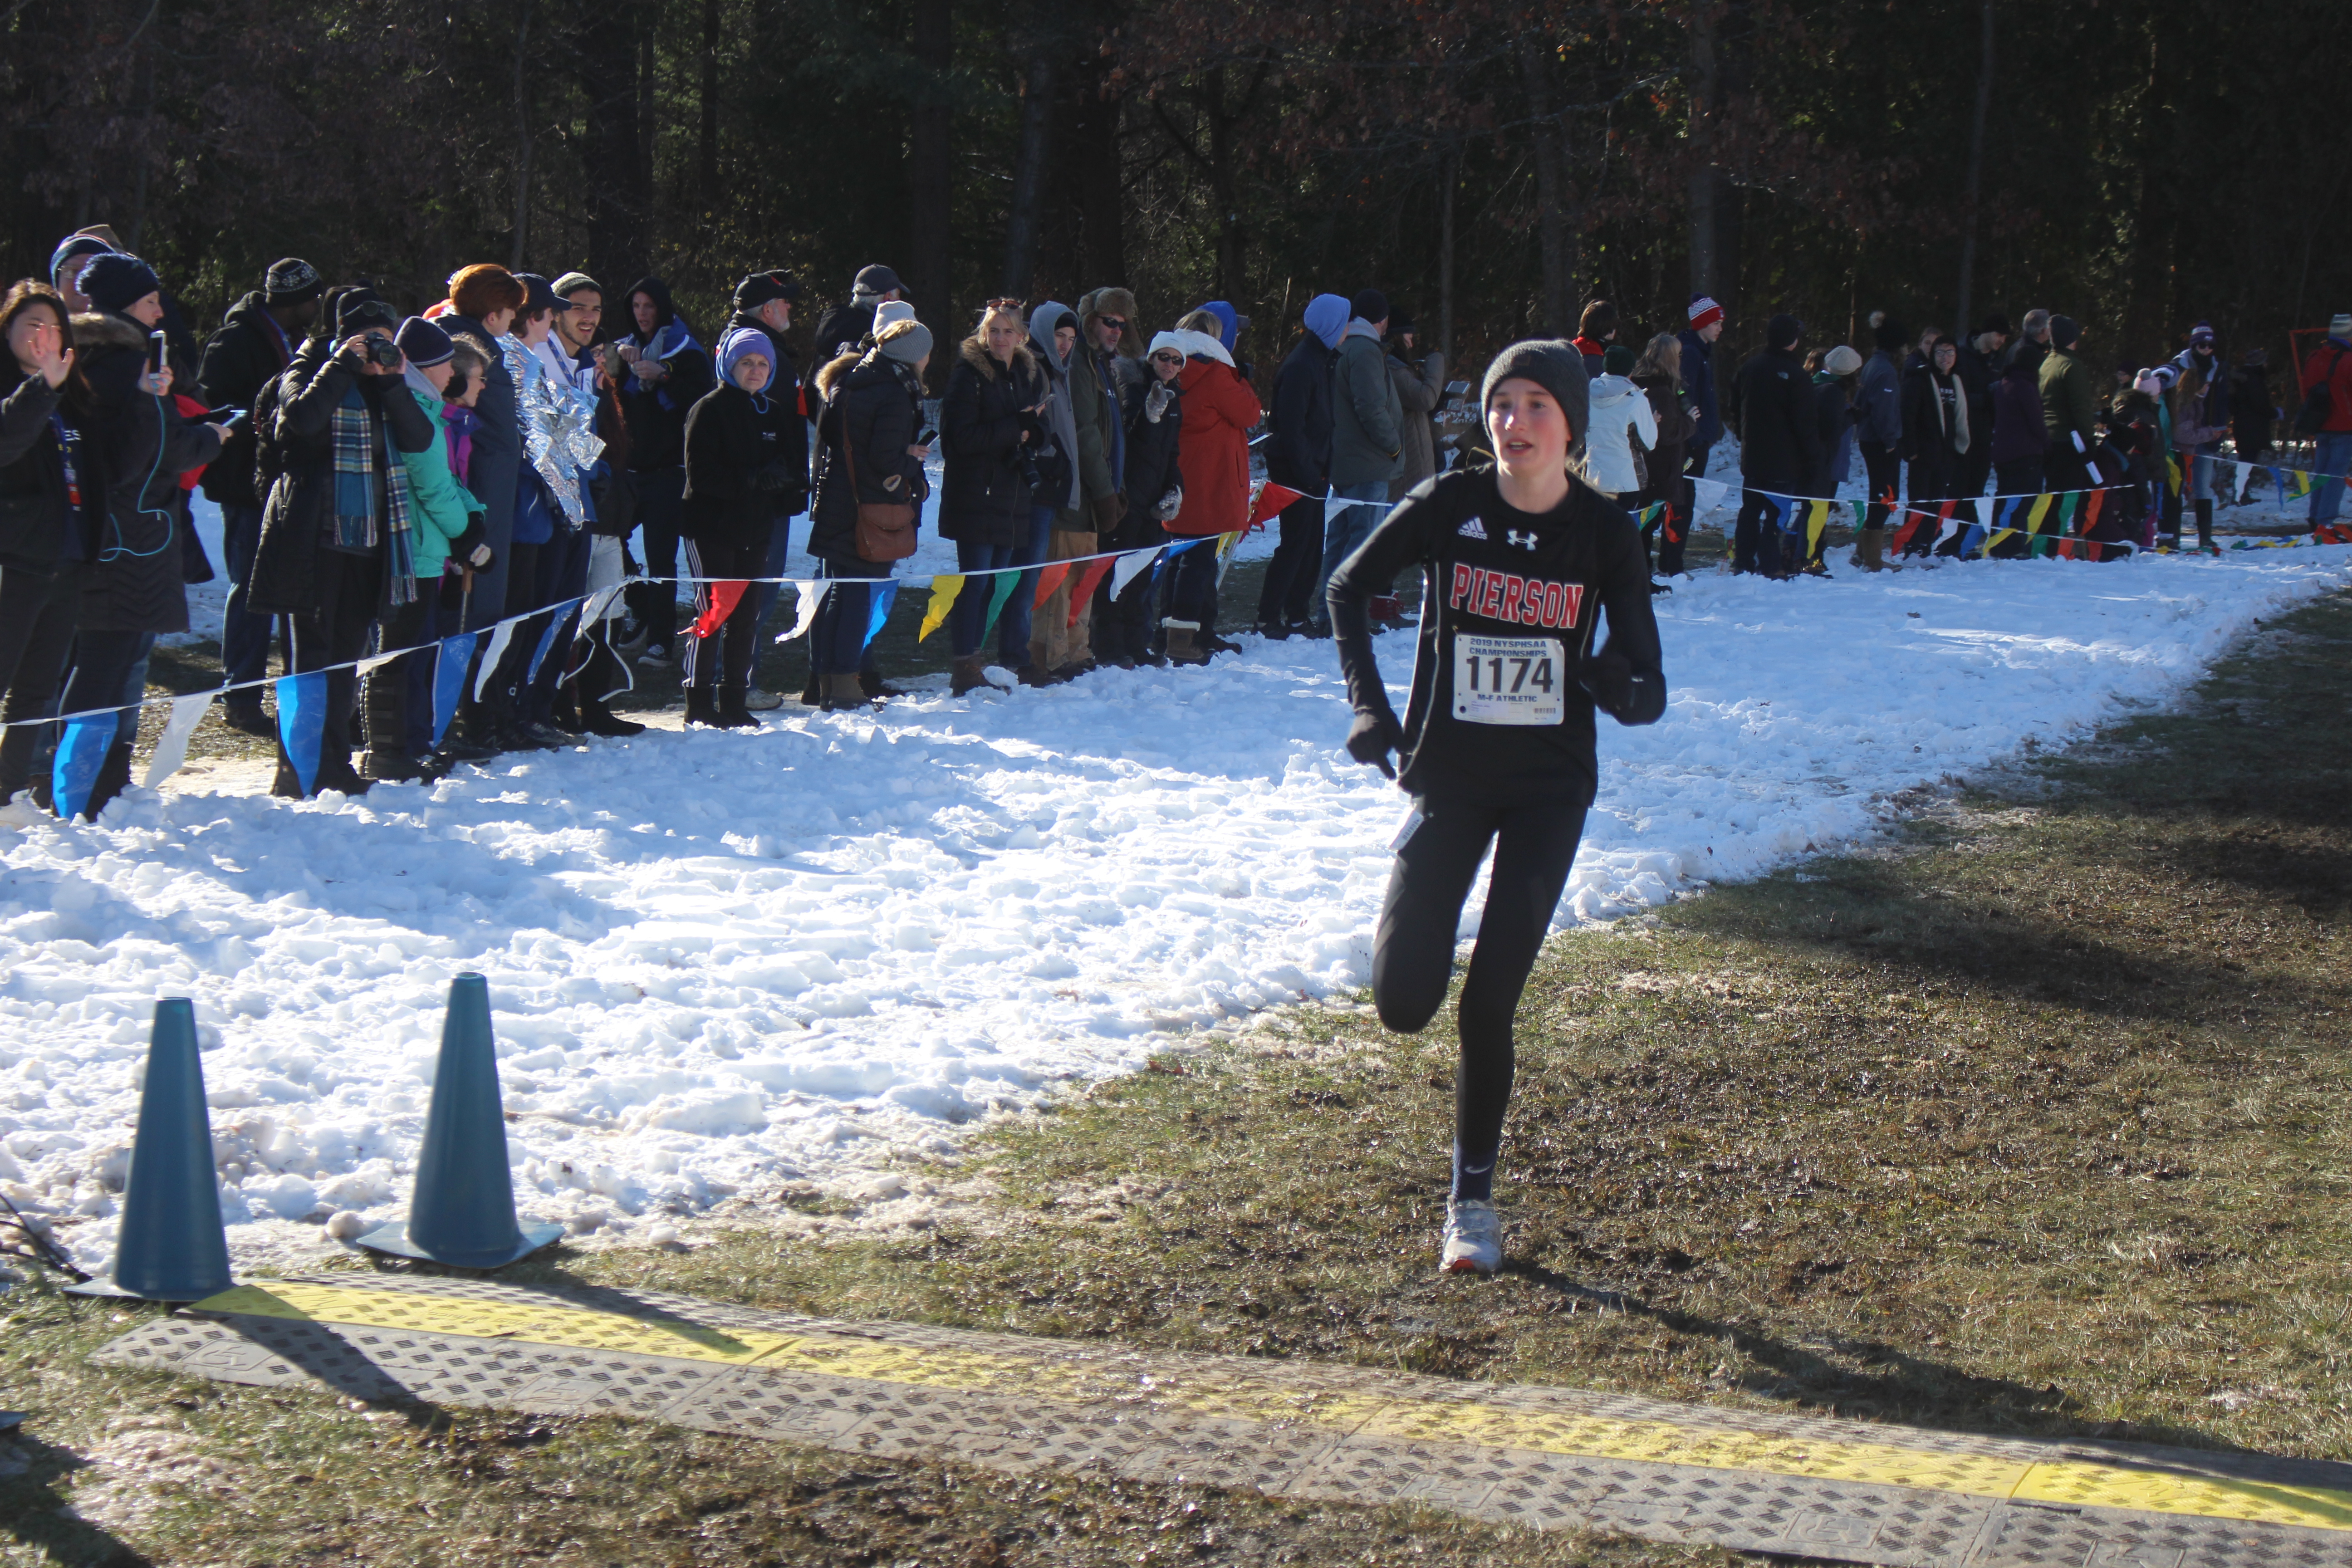 Abby Sherwood was Pierson's second finisher on Saturday.